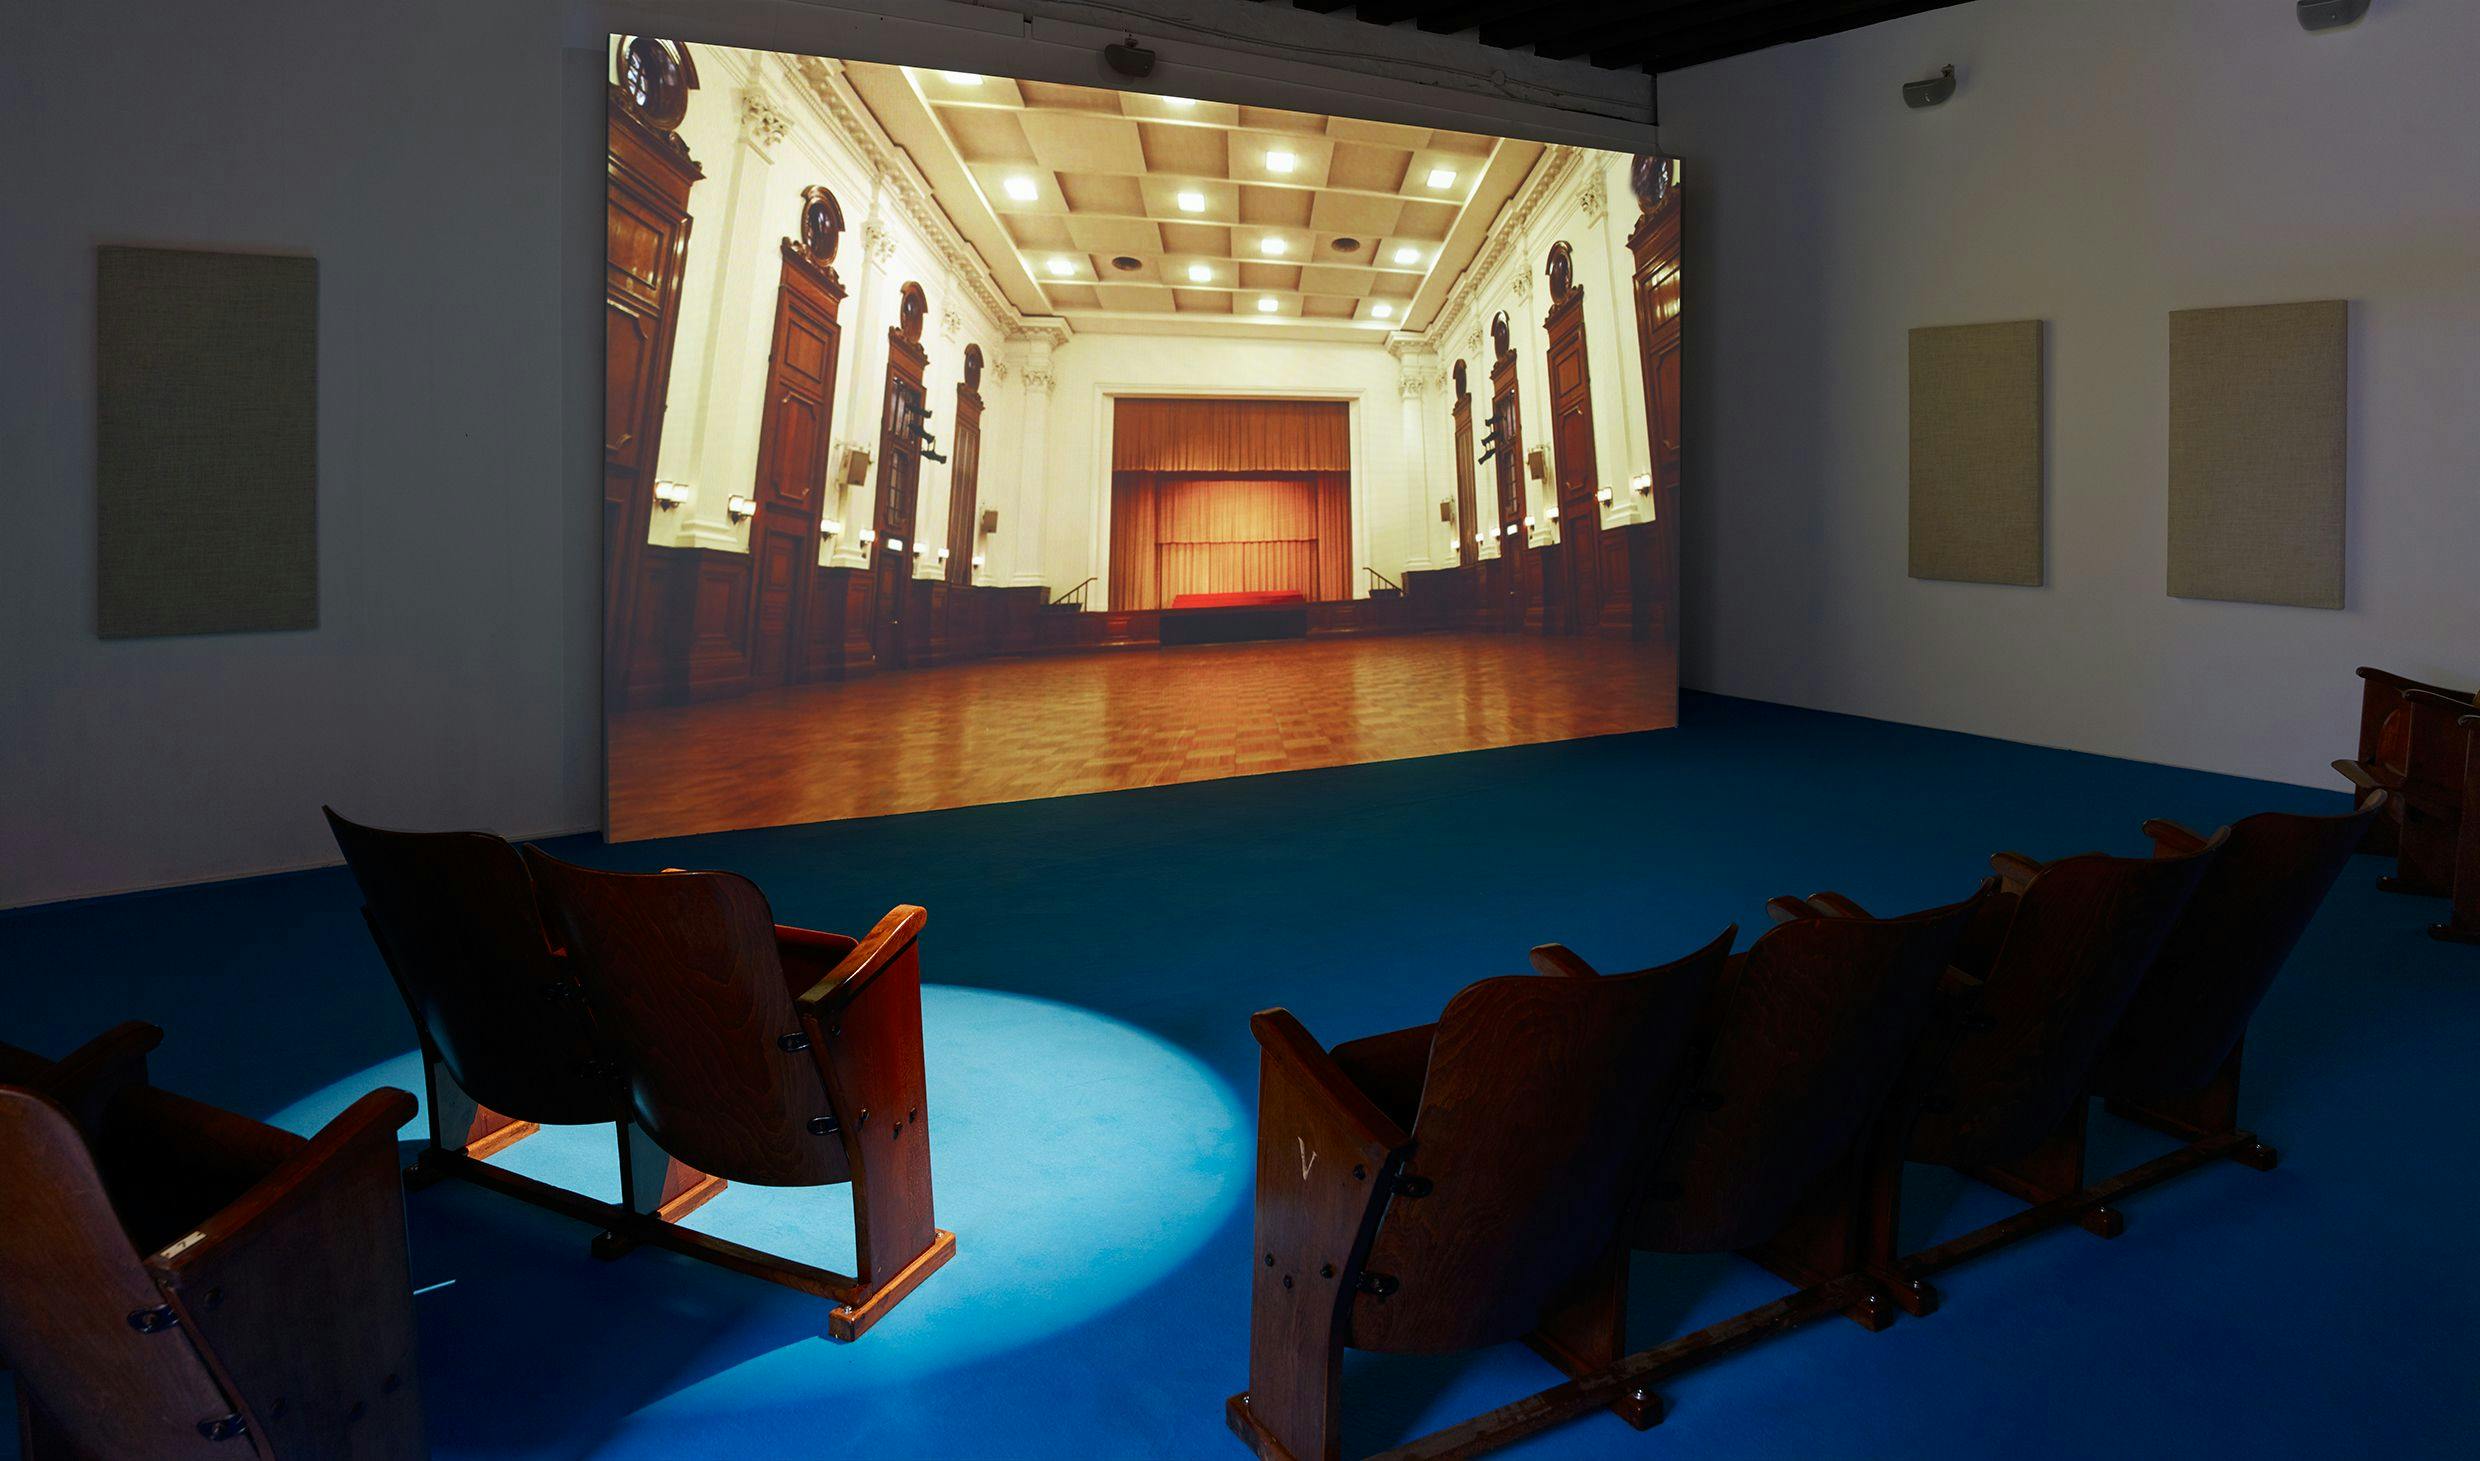 Installation view, Samson Young, We are the World, as performed by the Hong Kong Federation of Trade Unions Choir (Muted Situation #21) from Songs for Disaster Relief, Hong Kong Pavilion, 3 May - 26 November 2017, 57th Venice Biennale, Venice. We can see the work projected on the wall, beige sound panels and wooden church pews for the audience to sit on. The floor is covered in blue carpet.